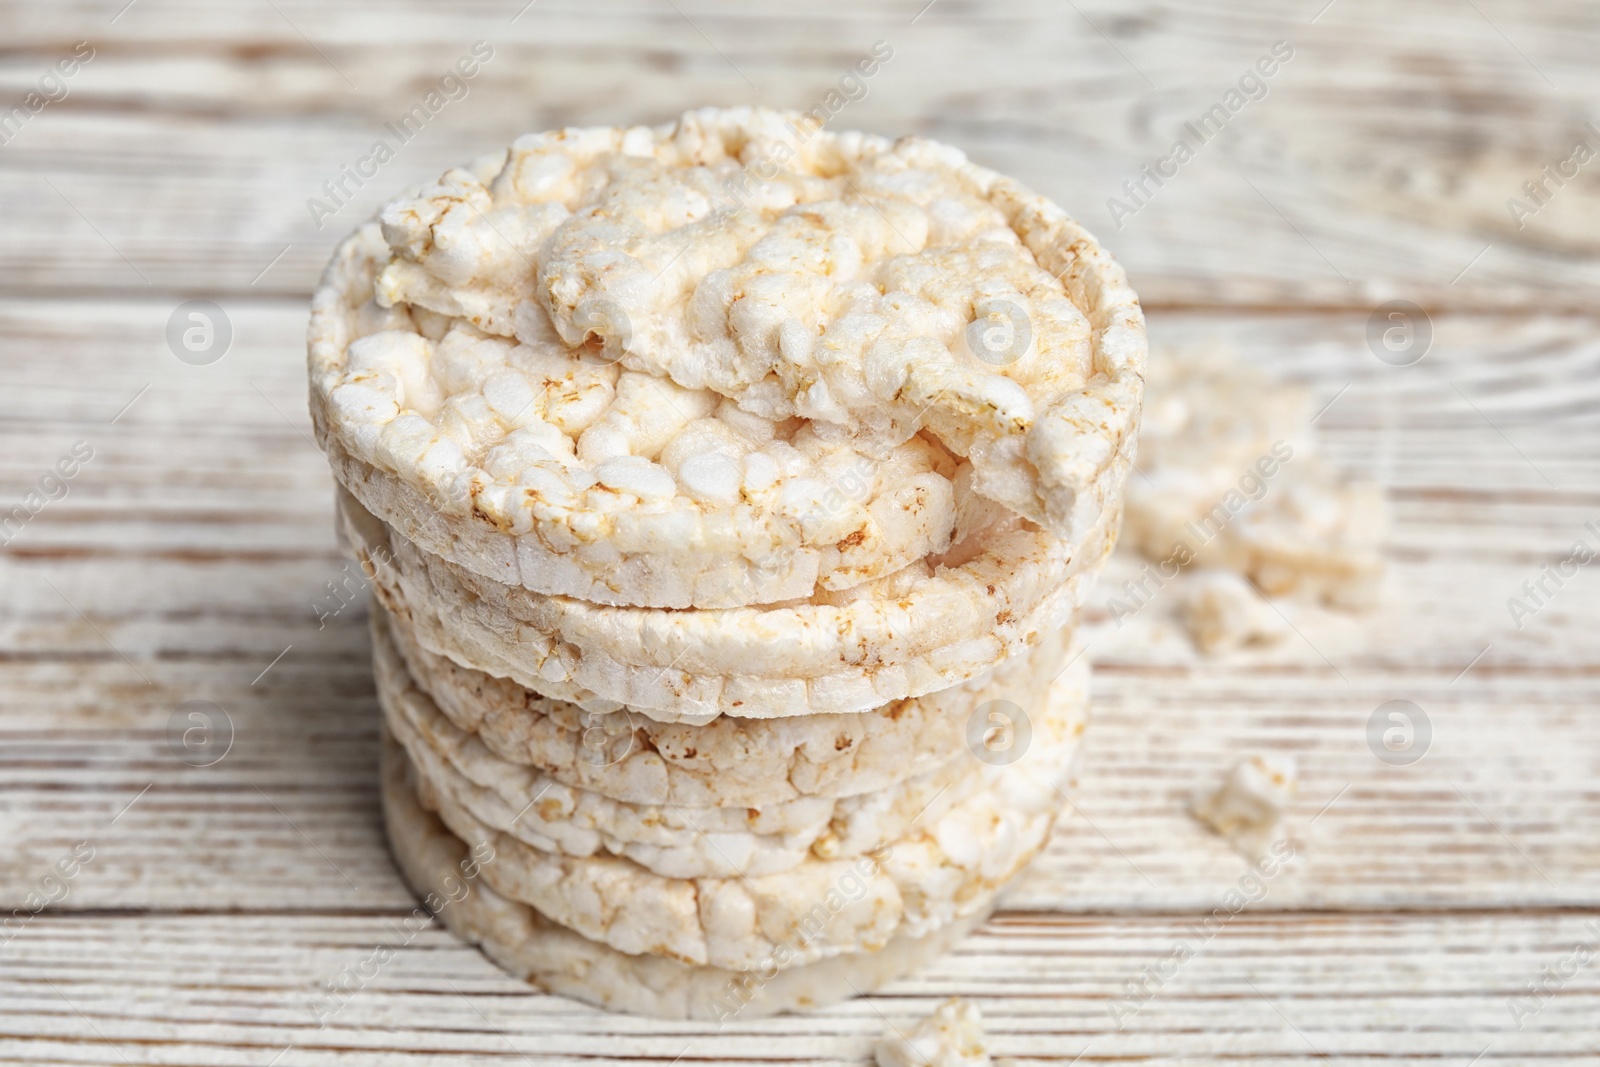 Photo of Stack of puffed rice cakes on white wooden table